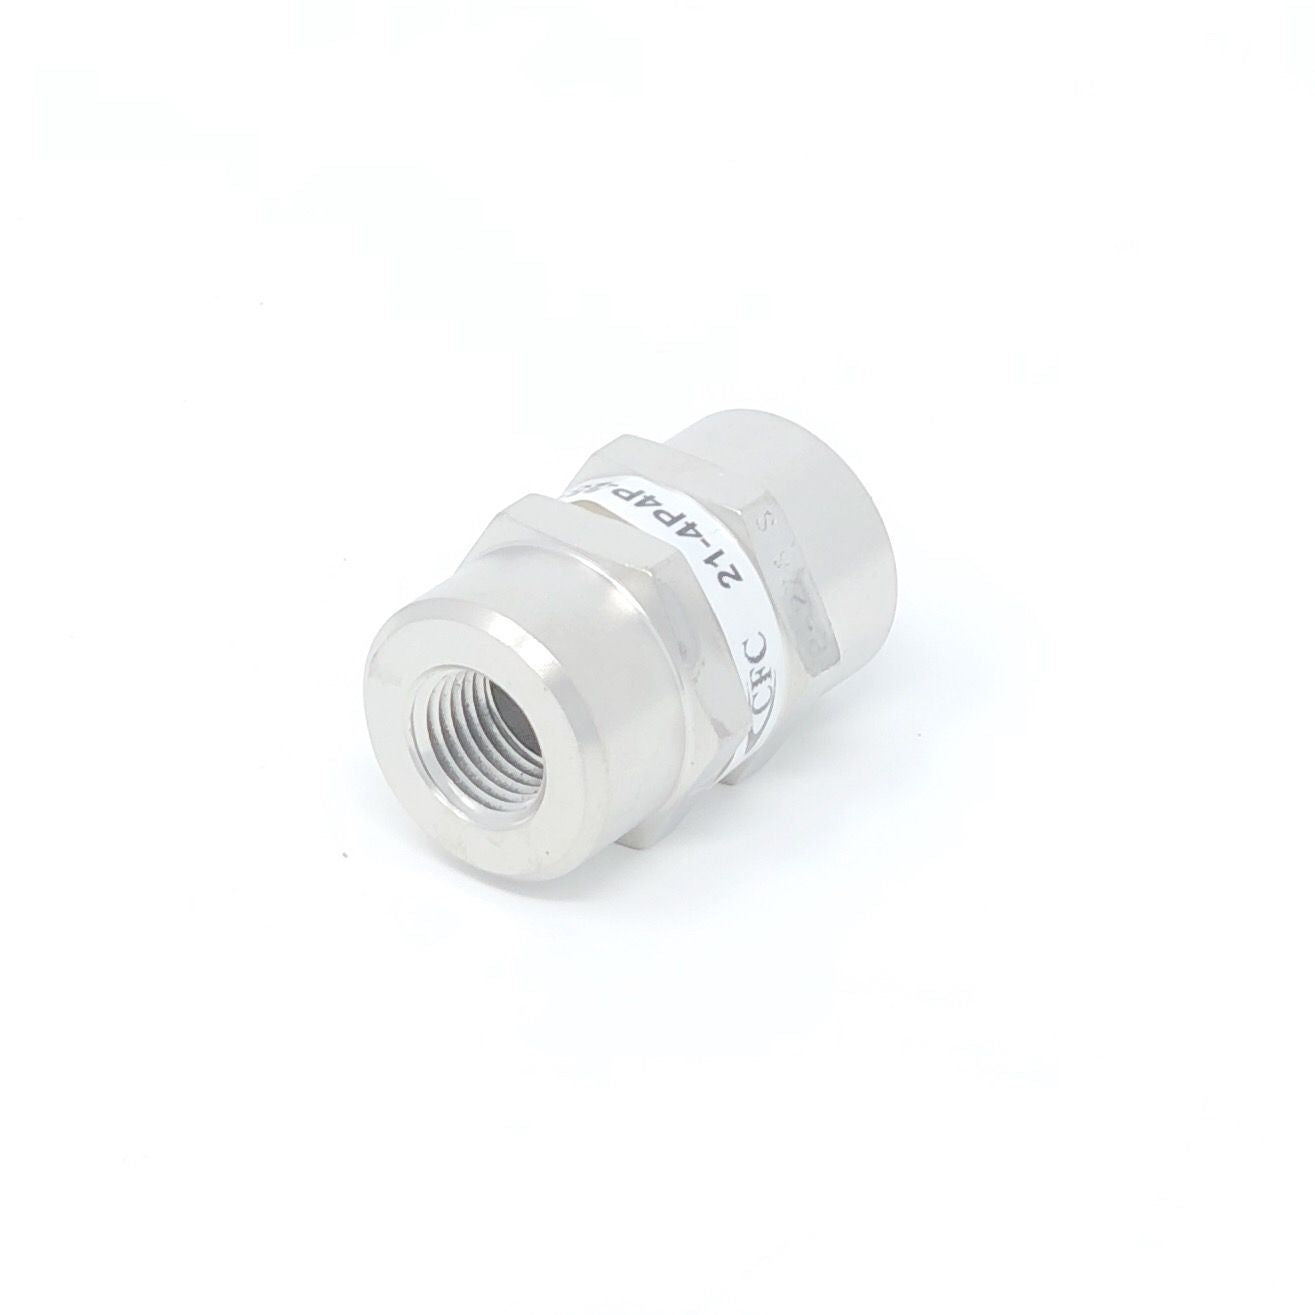 21-12S12S-40S : Chase High Pressure Inline Filter, 3000psi, #12 SAE (3/4"), 40 Micron, No Visual Indicator, With Bypass